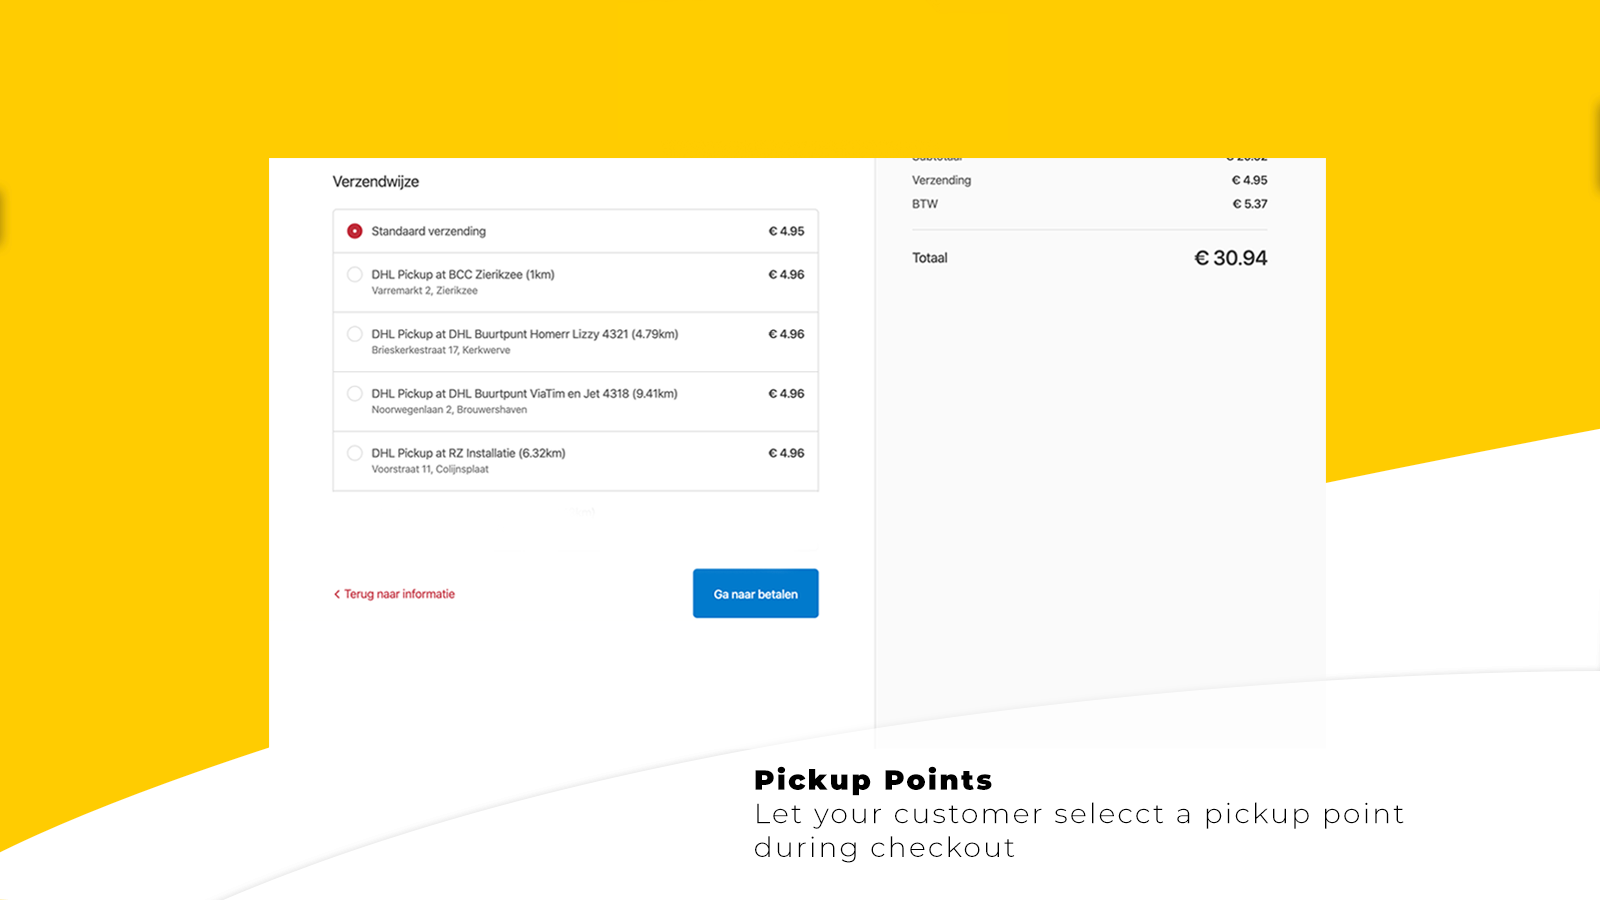 Display pickup points during checkout